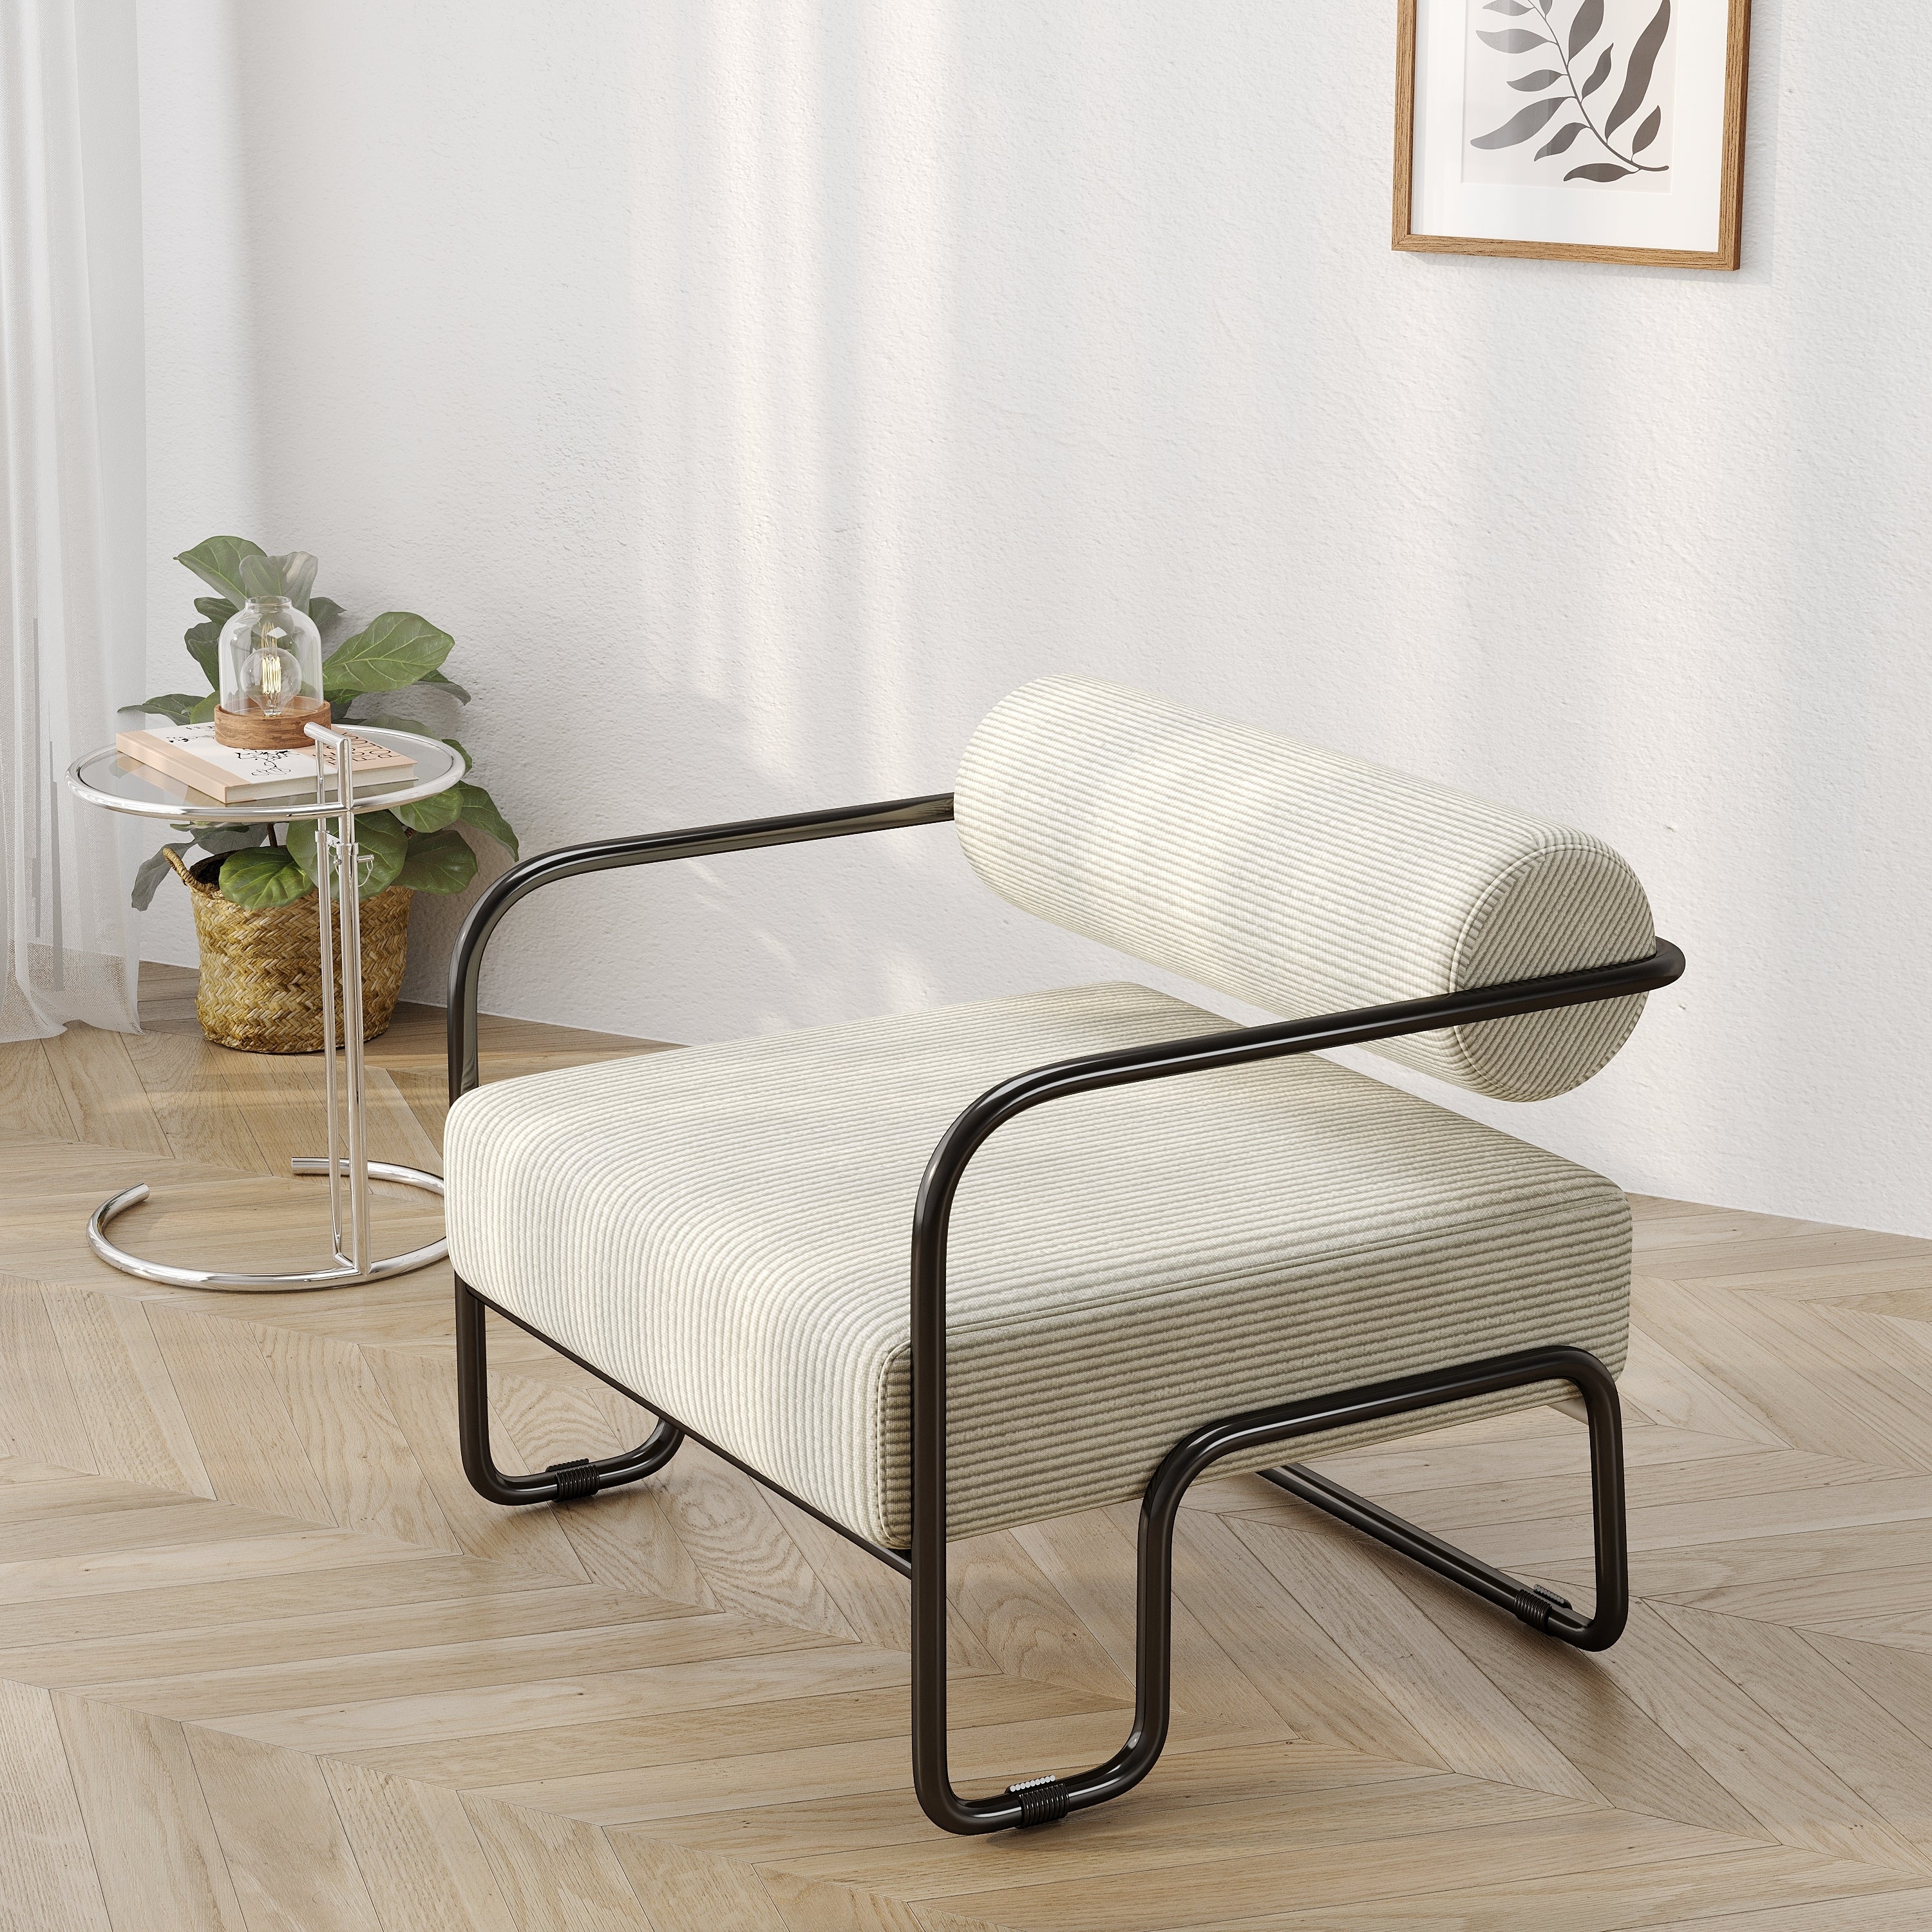 🆓🚛 Unique Design Living Room Iron Sofa Chair, Lazy Individual Chair, Balcony Leisure Chair, Beige